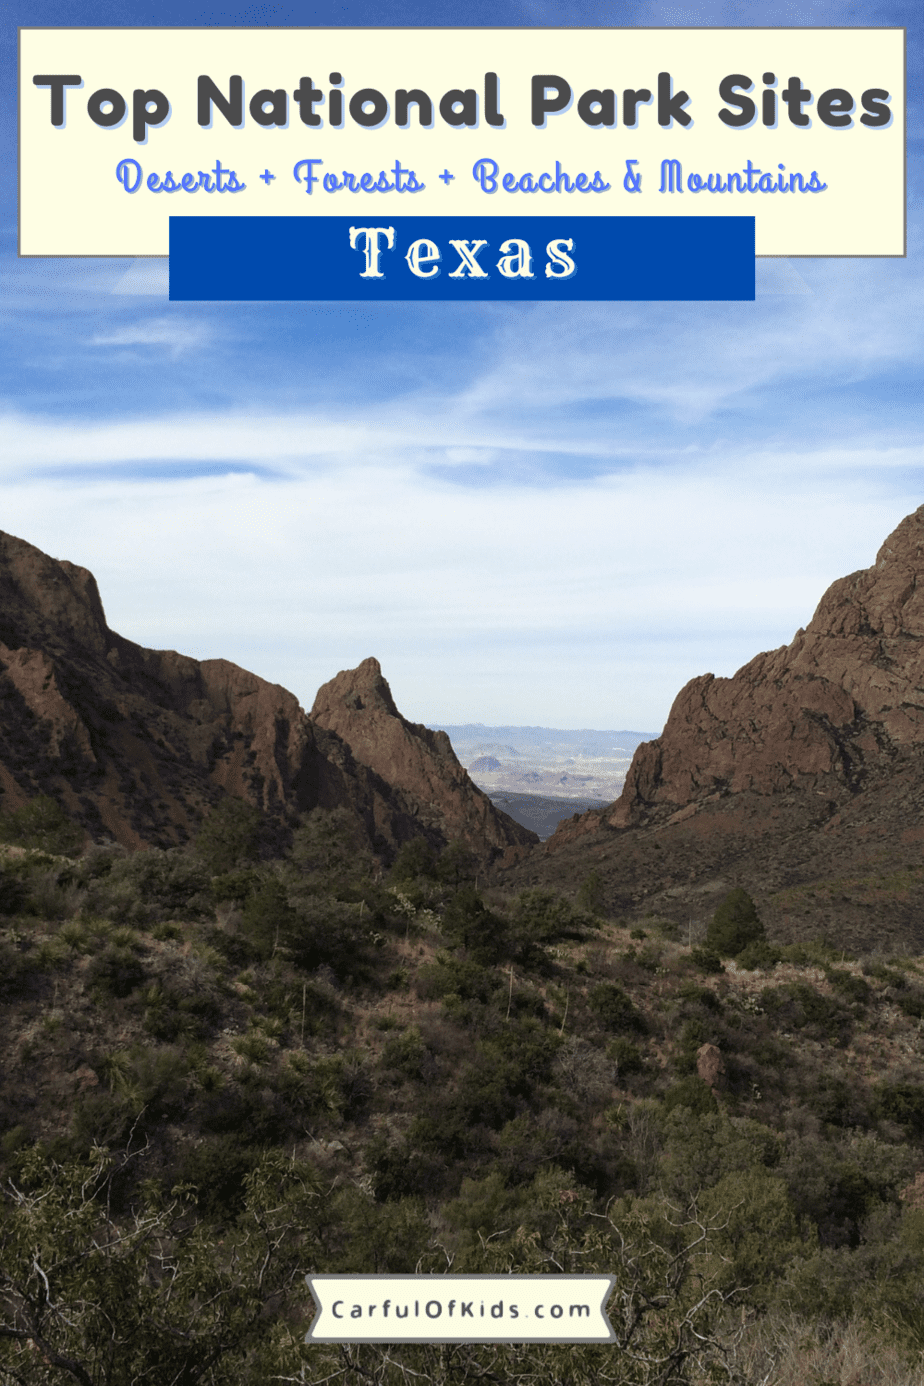 Texas is BIG and it takes a full day to drive across it. See the most spectacular scenery in Texas, like Big Bend and Guadalupe Mountains. Find National Park Service units across Texas like the San Antonio Missions National Historical Park or Padre Island National Seashore. Here's the guide to all the National Parks of Texas. TOP National Parks of Texas #Texas #NationalParks 